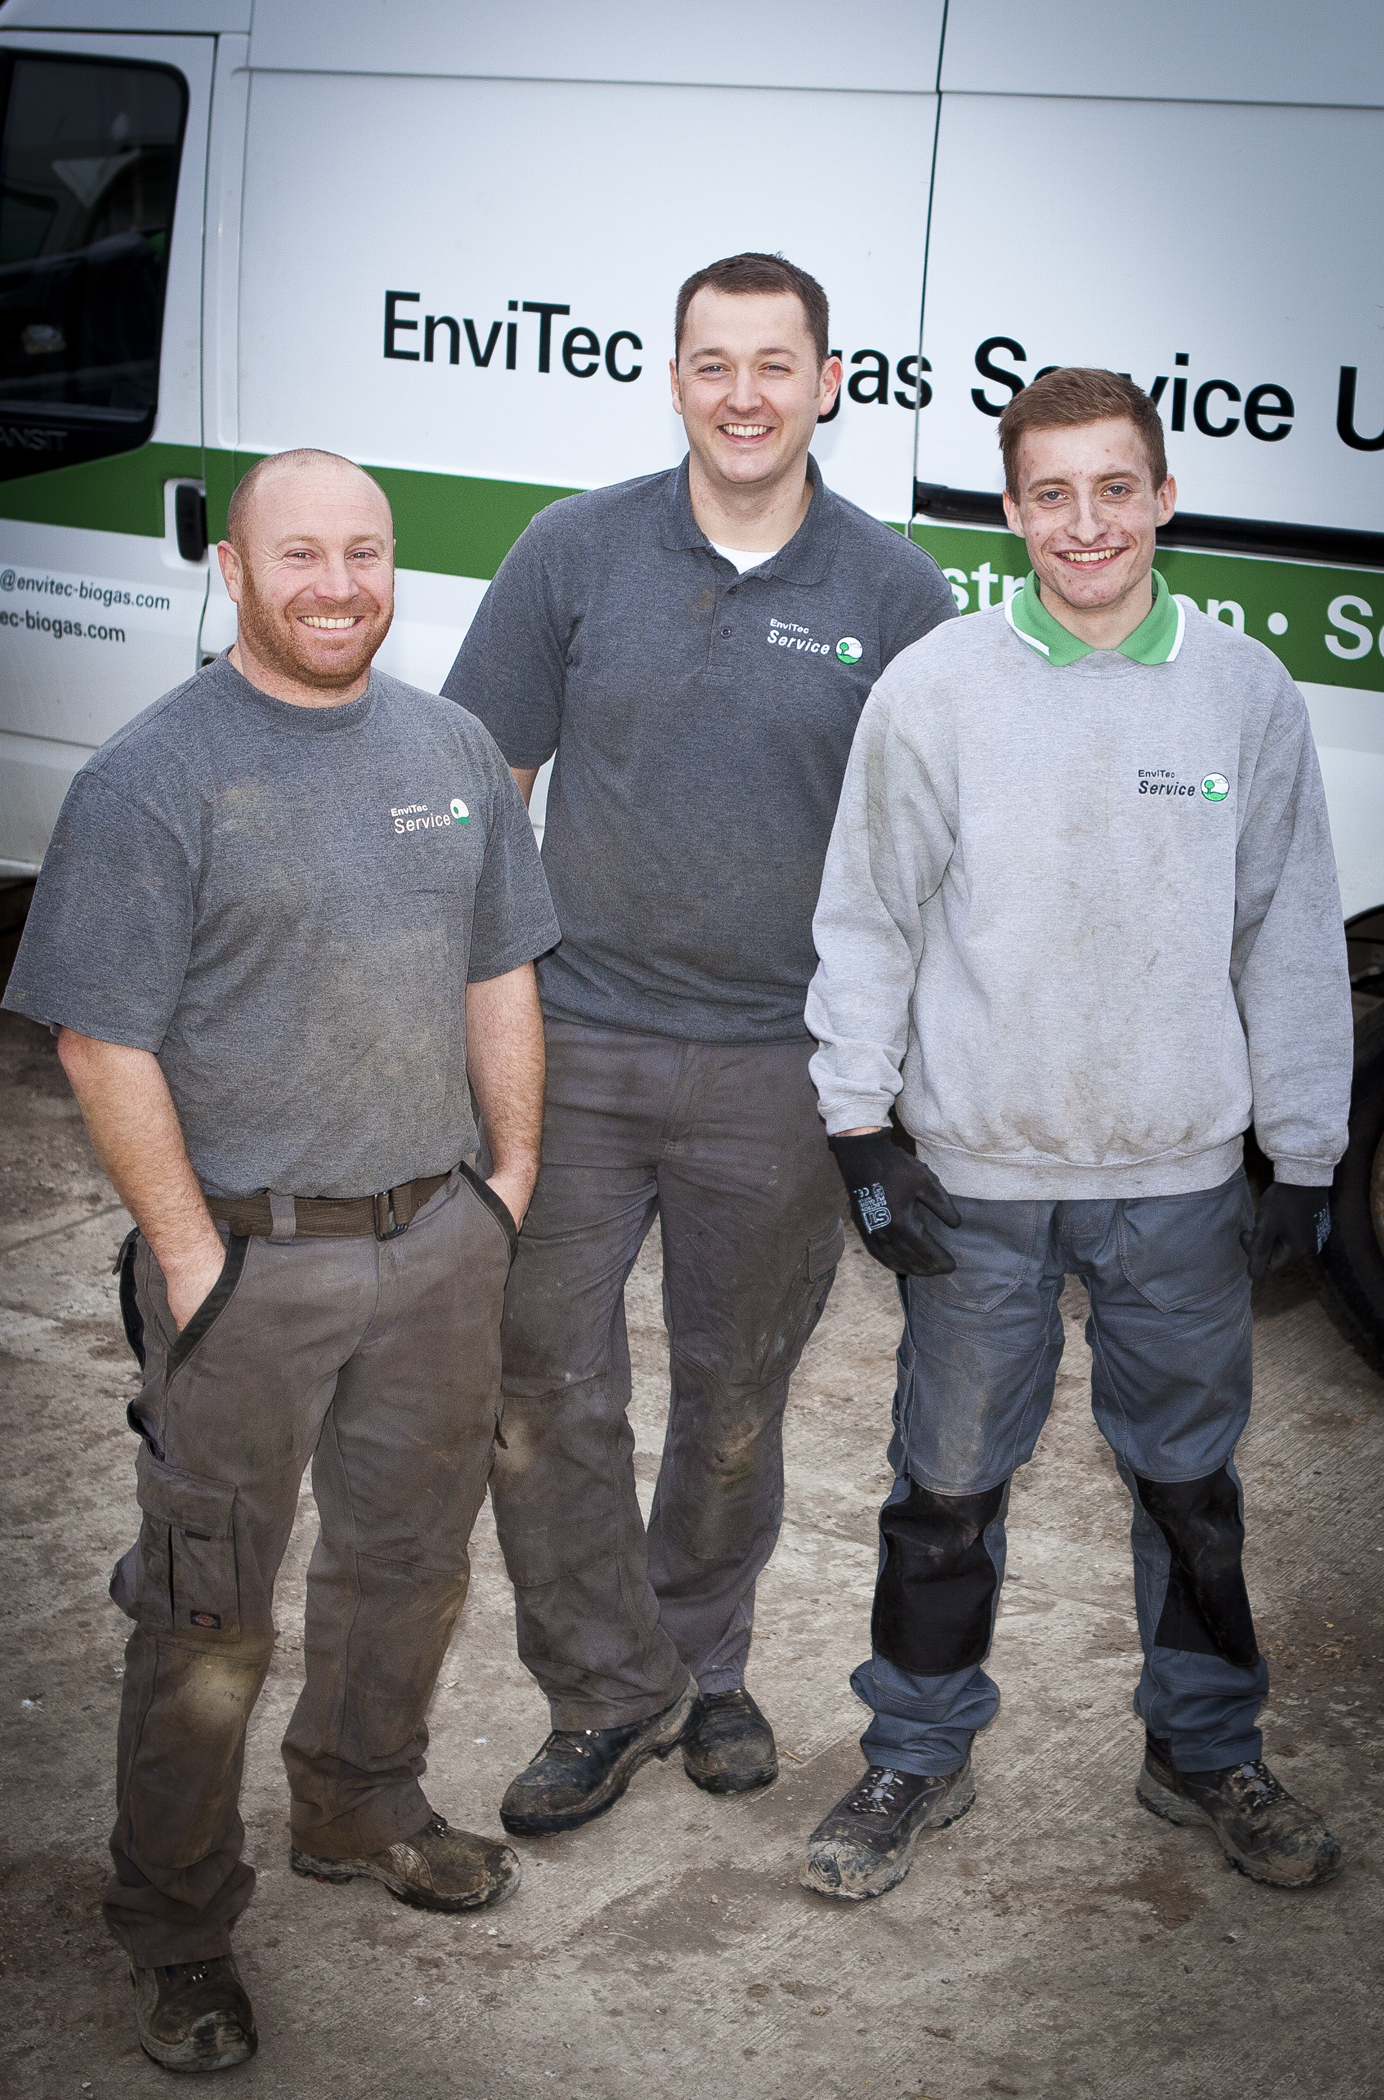 Left to right - Graham Cocking, Philip Mason and apprentice Gary Hurd, all of the EnviTec Biogas UK Service Team